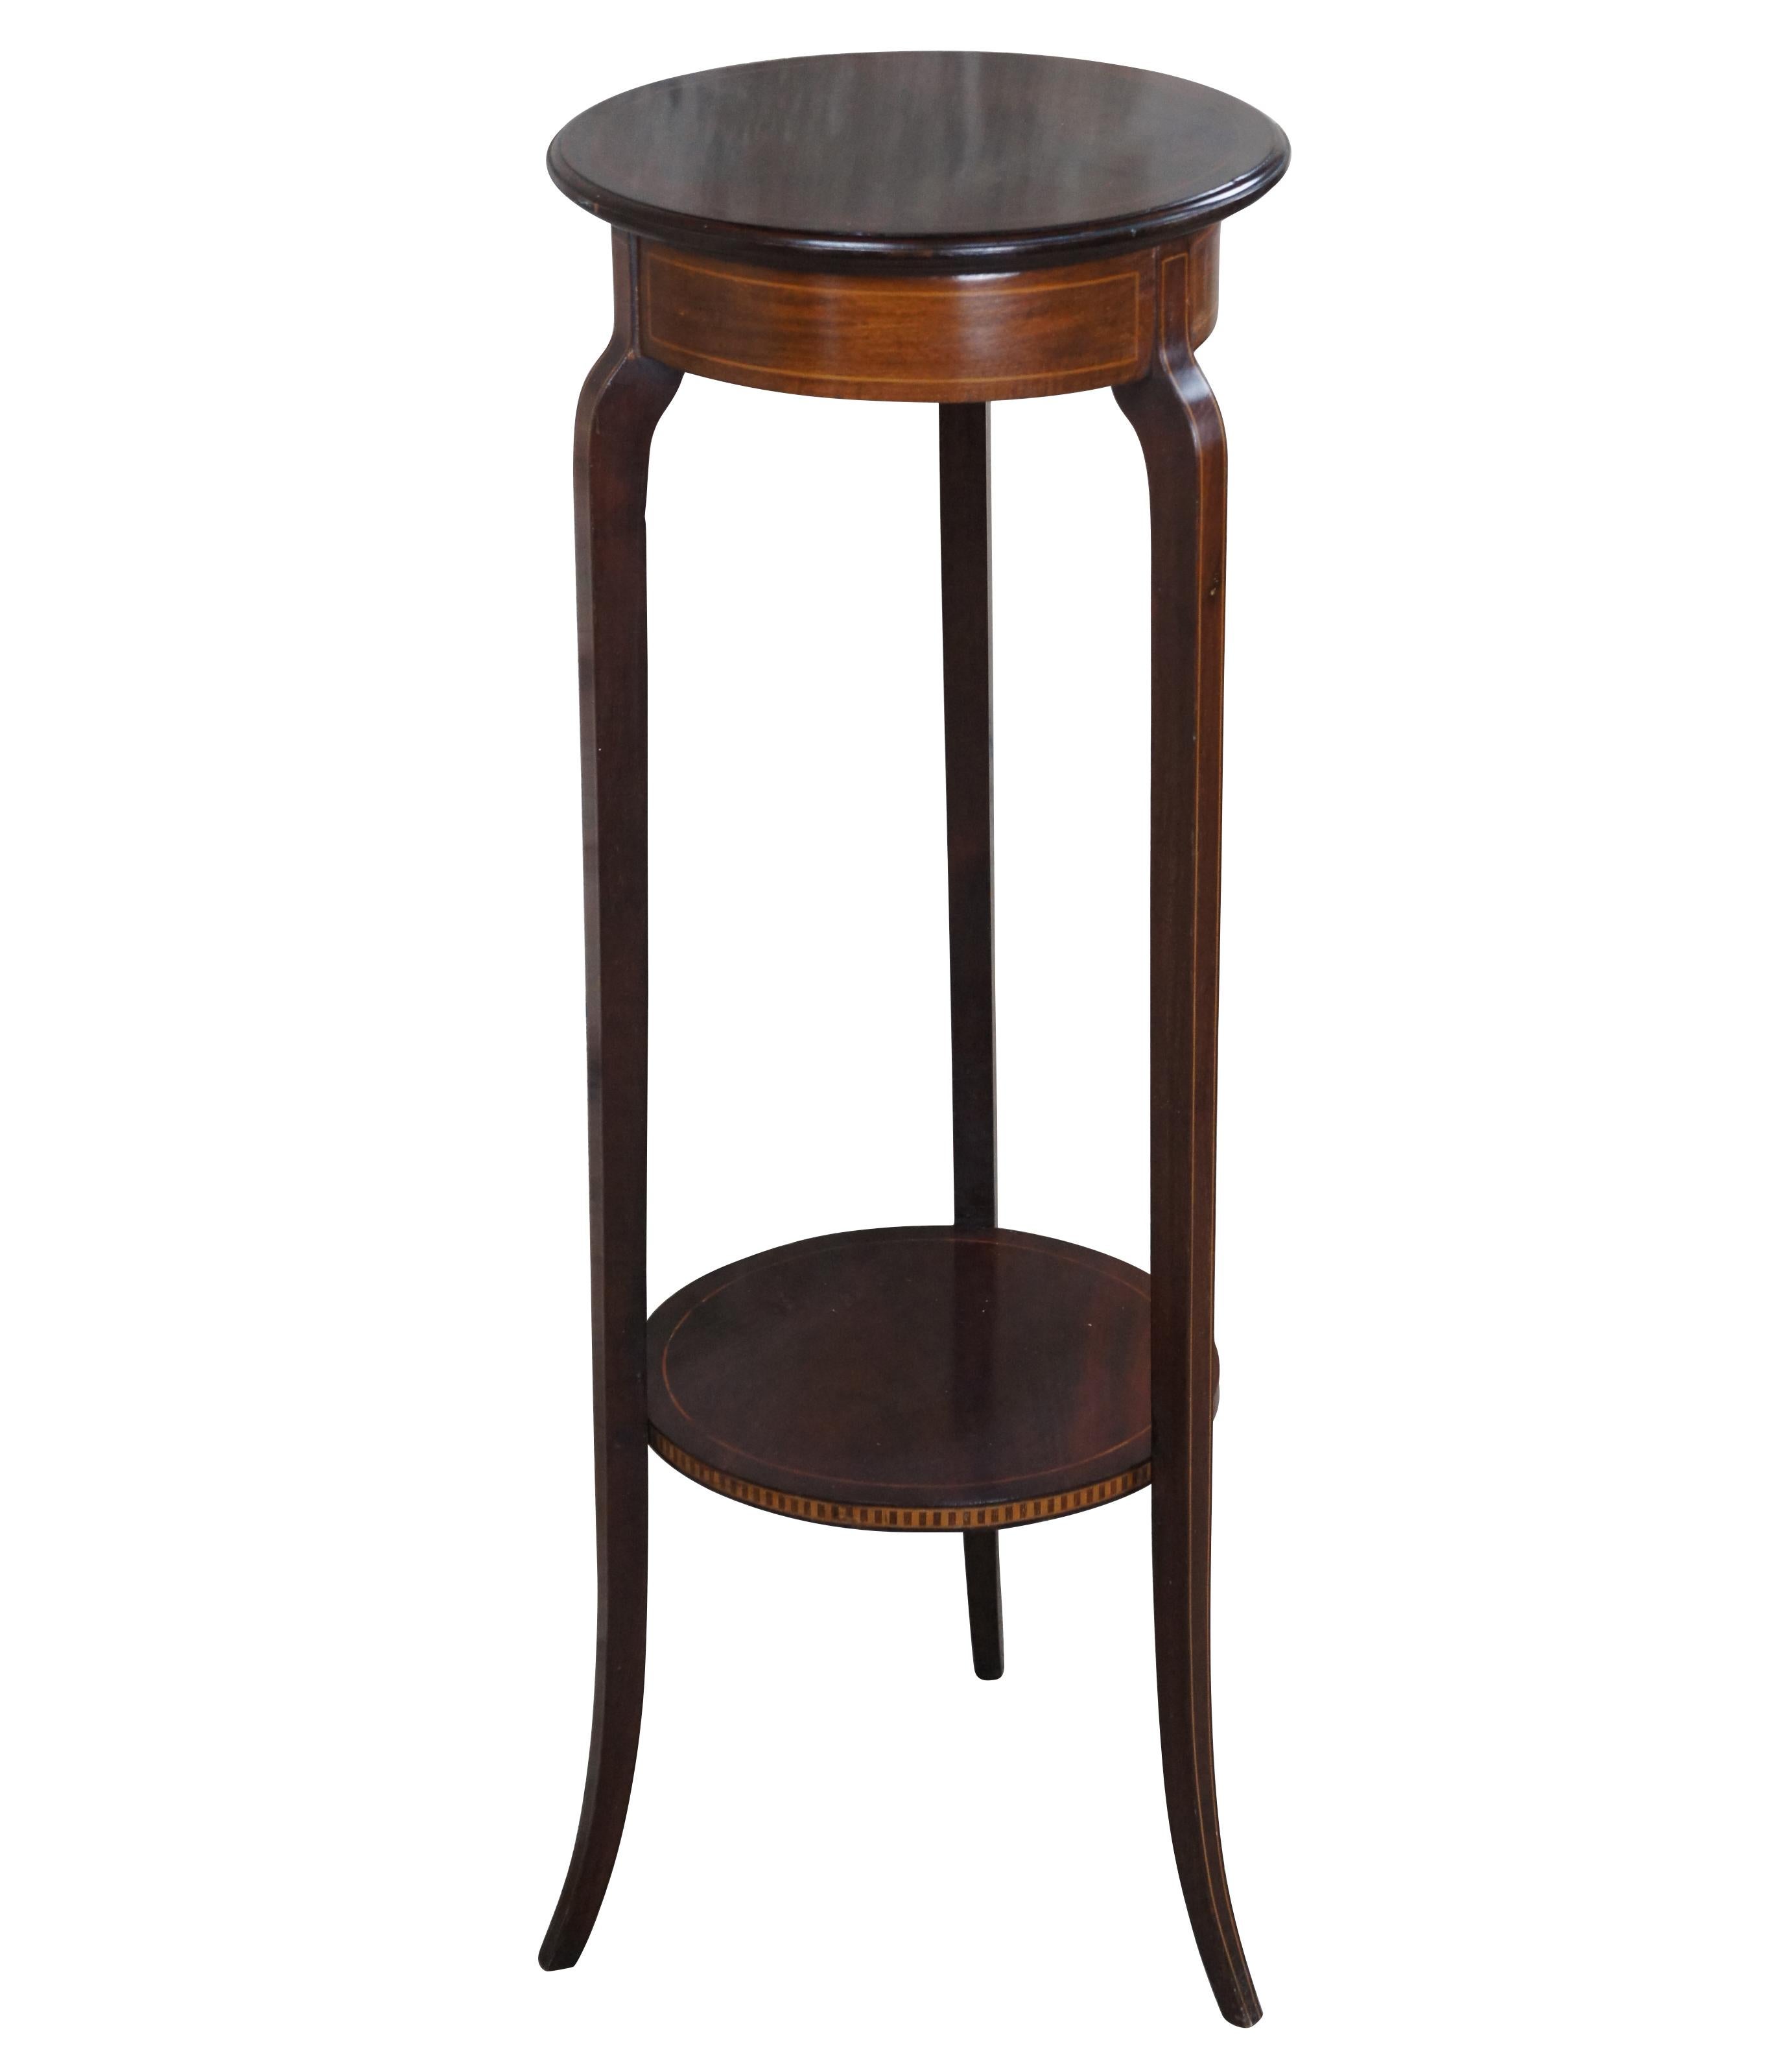 English Edwardian plant stand or sculpture pedestal, circa 1900-1910.  Made from Mahogany with satinwood inlay.  Features a round form over three slender legs connected towards the bottom by a banded shelf

Dimensions: 
36